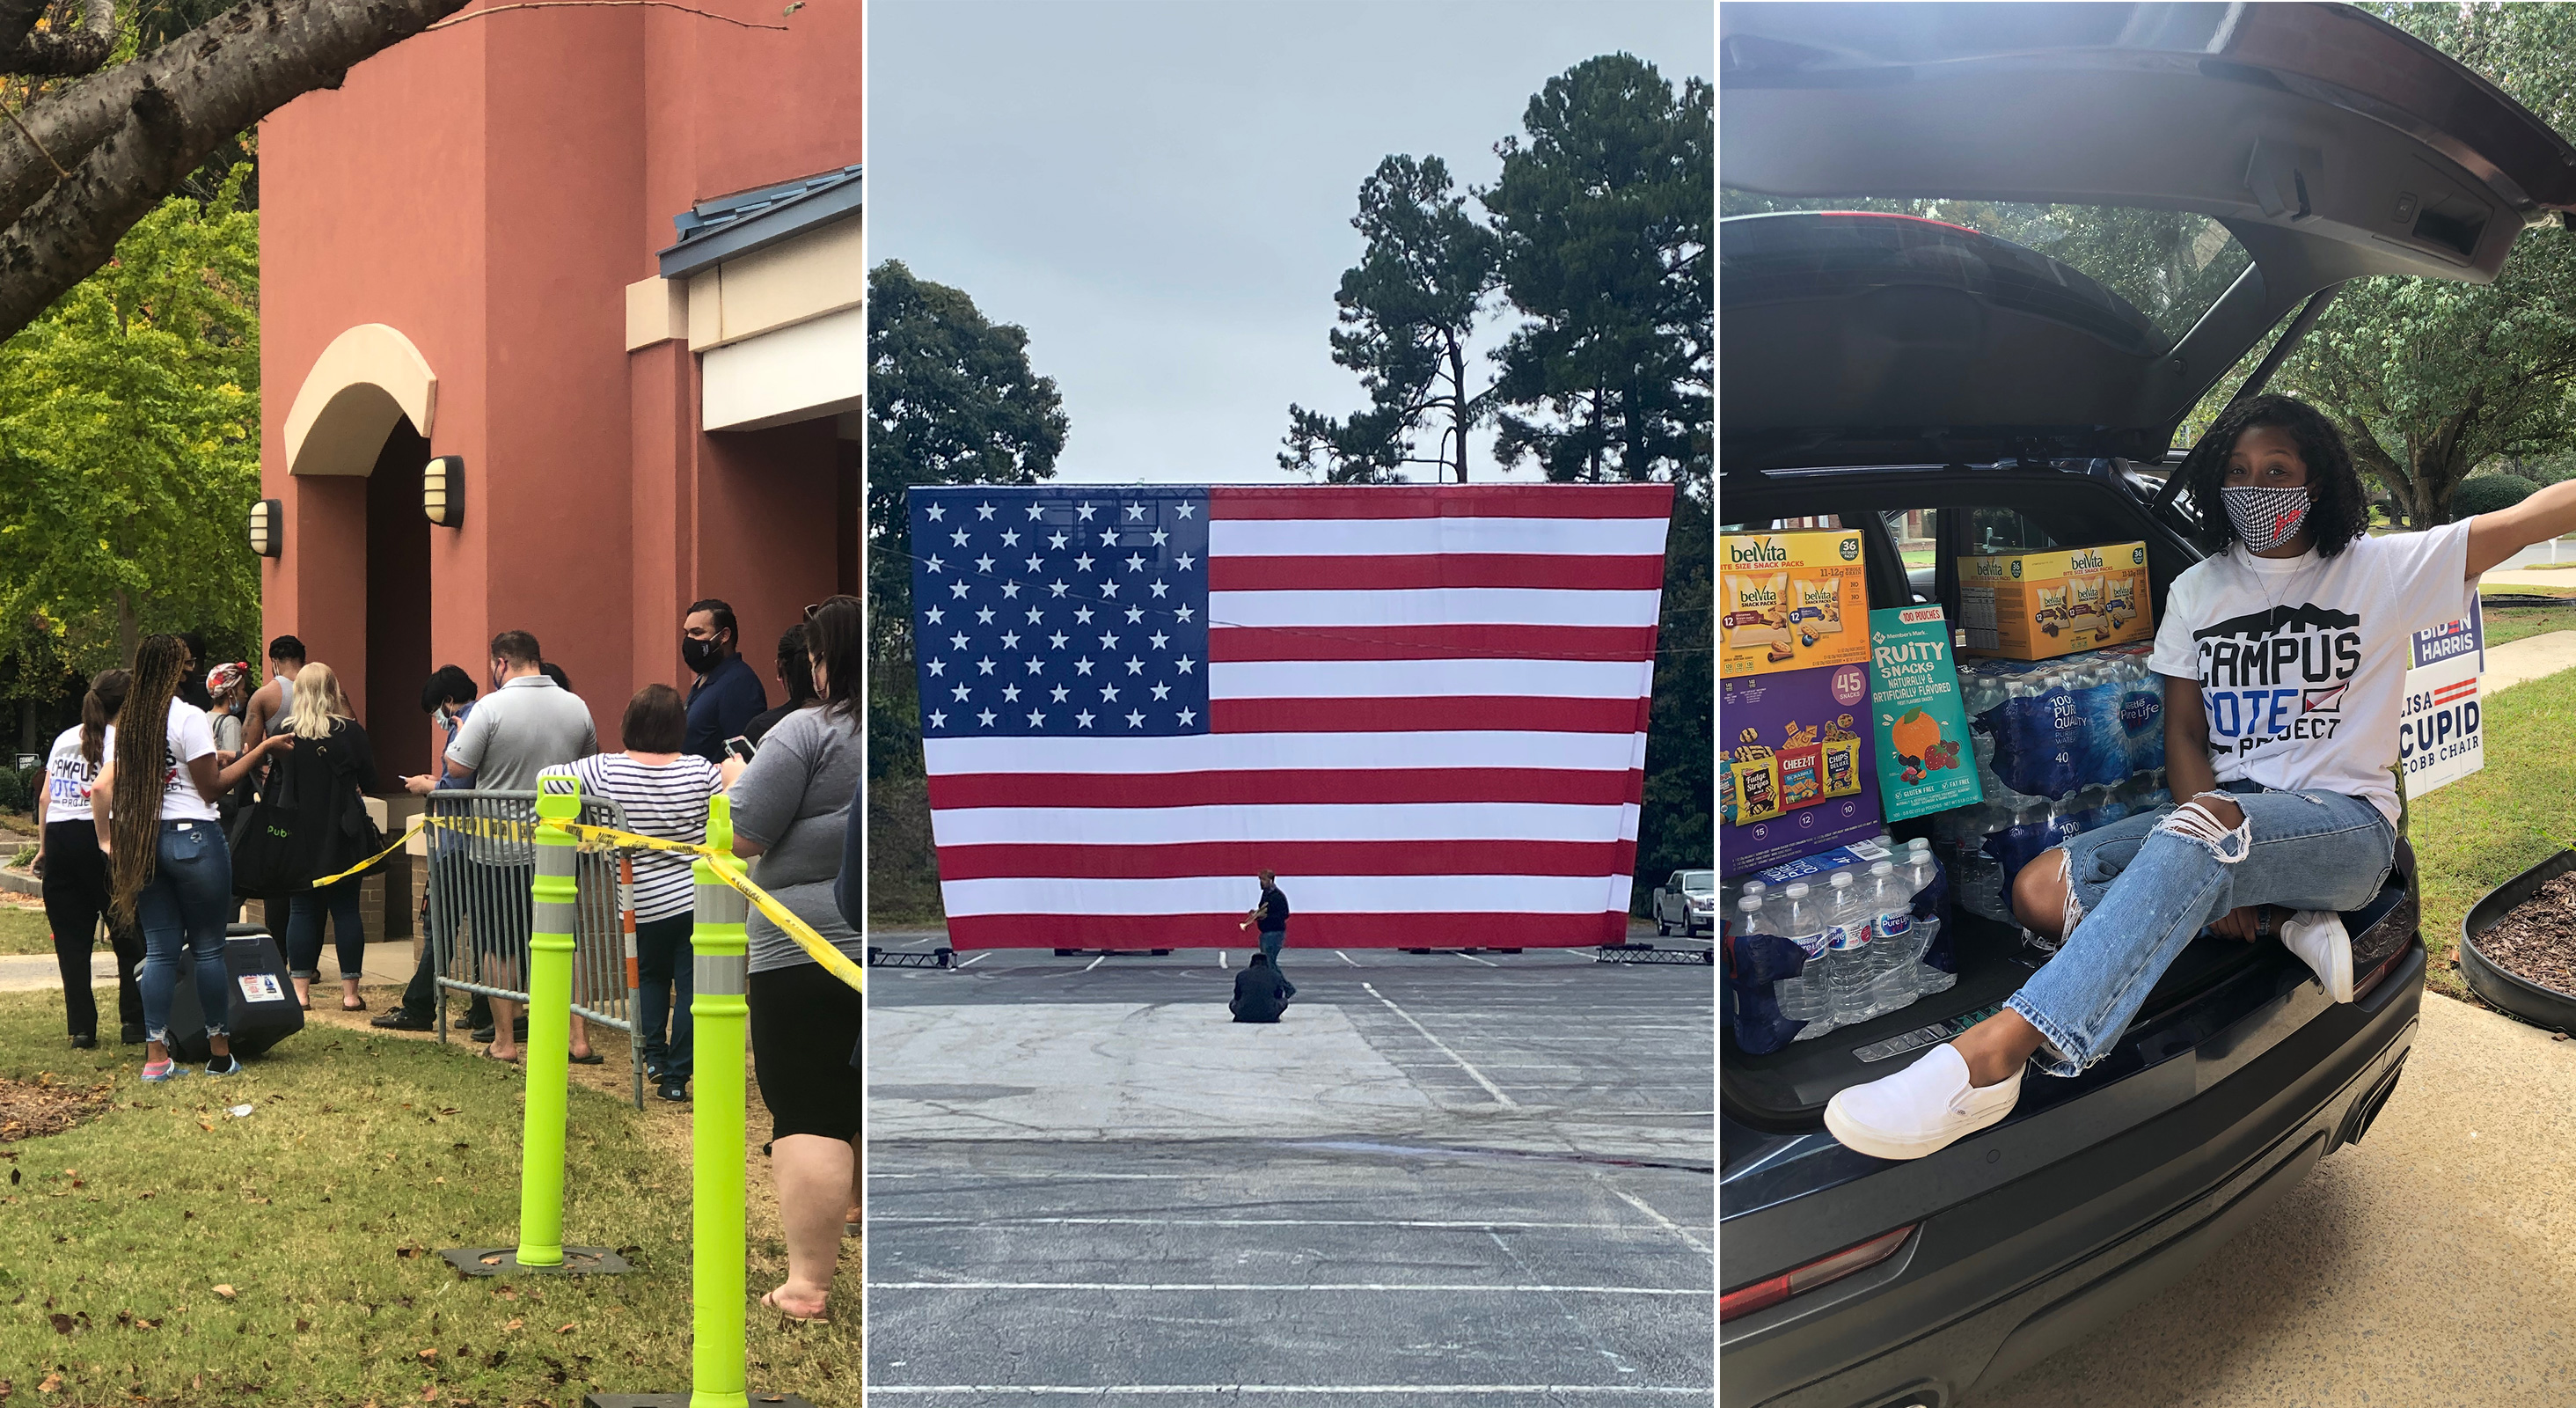 Left: Voter lines in Georgia; Center: a U.S. flag in Atlanta; Right: Ciarra Malone, pictured volunteering for the Campus Vote Project during early voting (Left, Right: Courtesy Ciarra Malone; Center: Courtesy Manny Yekutiel)